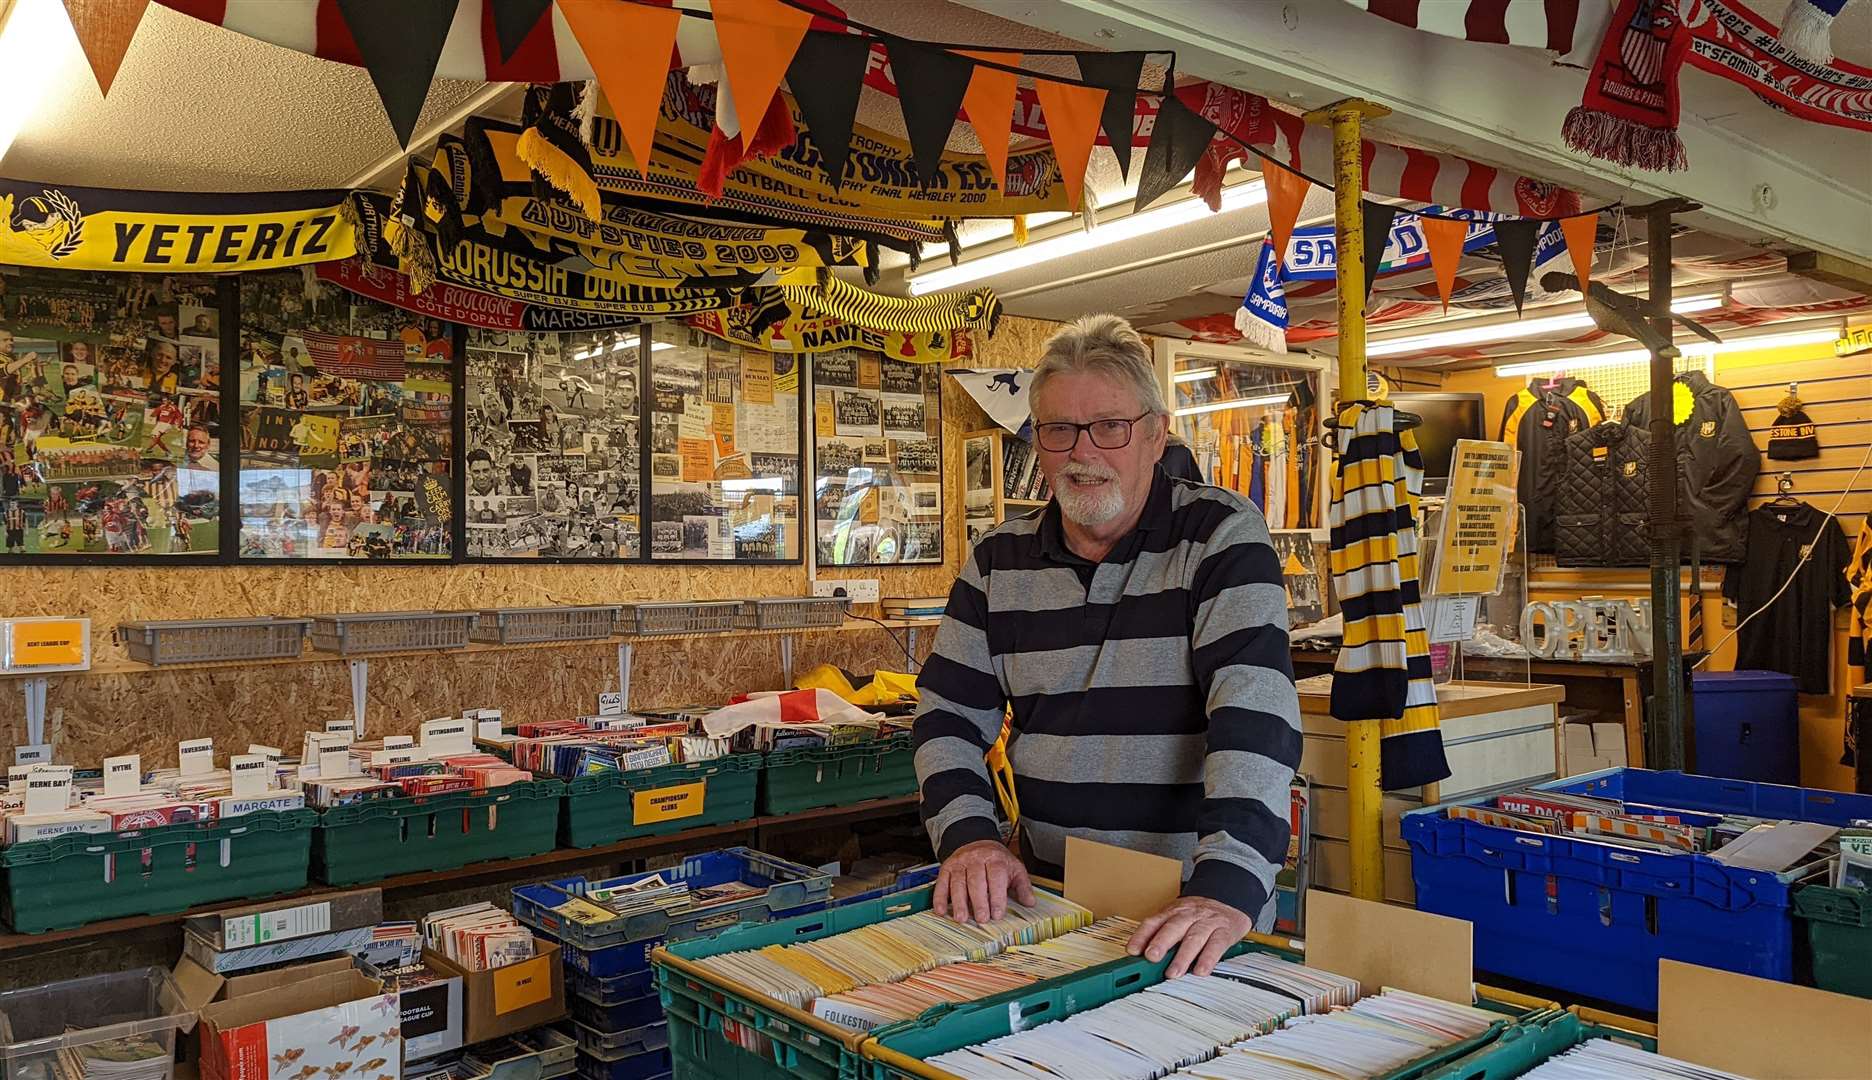 Geoff Senior and his fellow volunteers have collected a remarkable range of football programs and other memorabilia in the Folkestone Invicta club shop